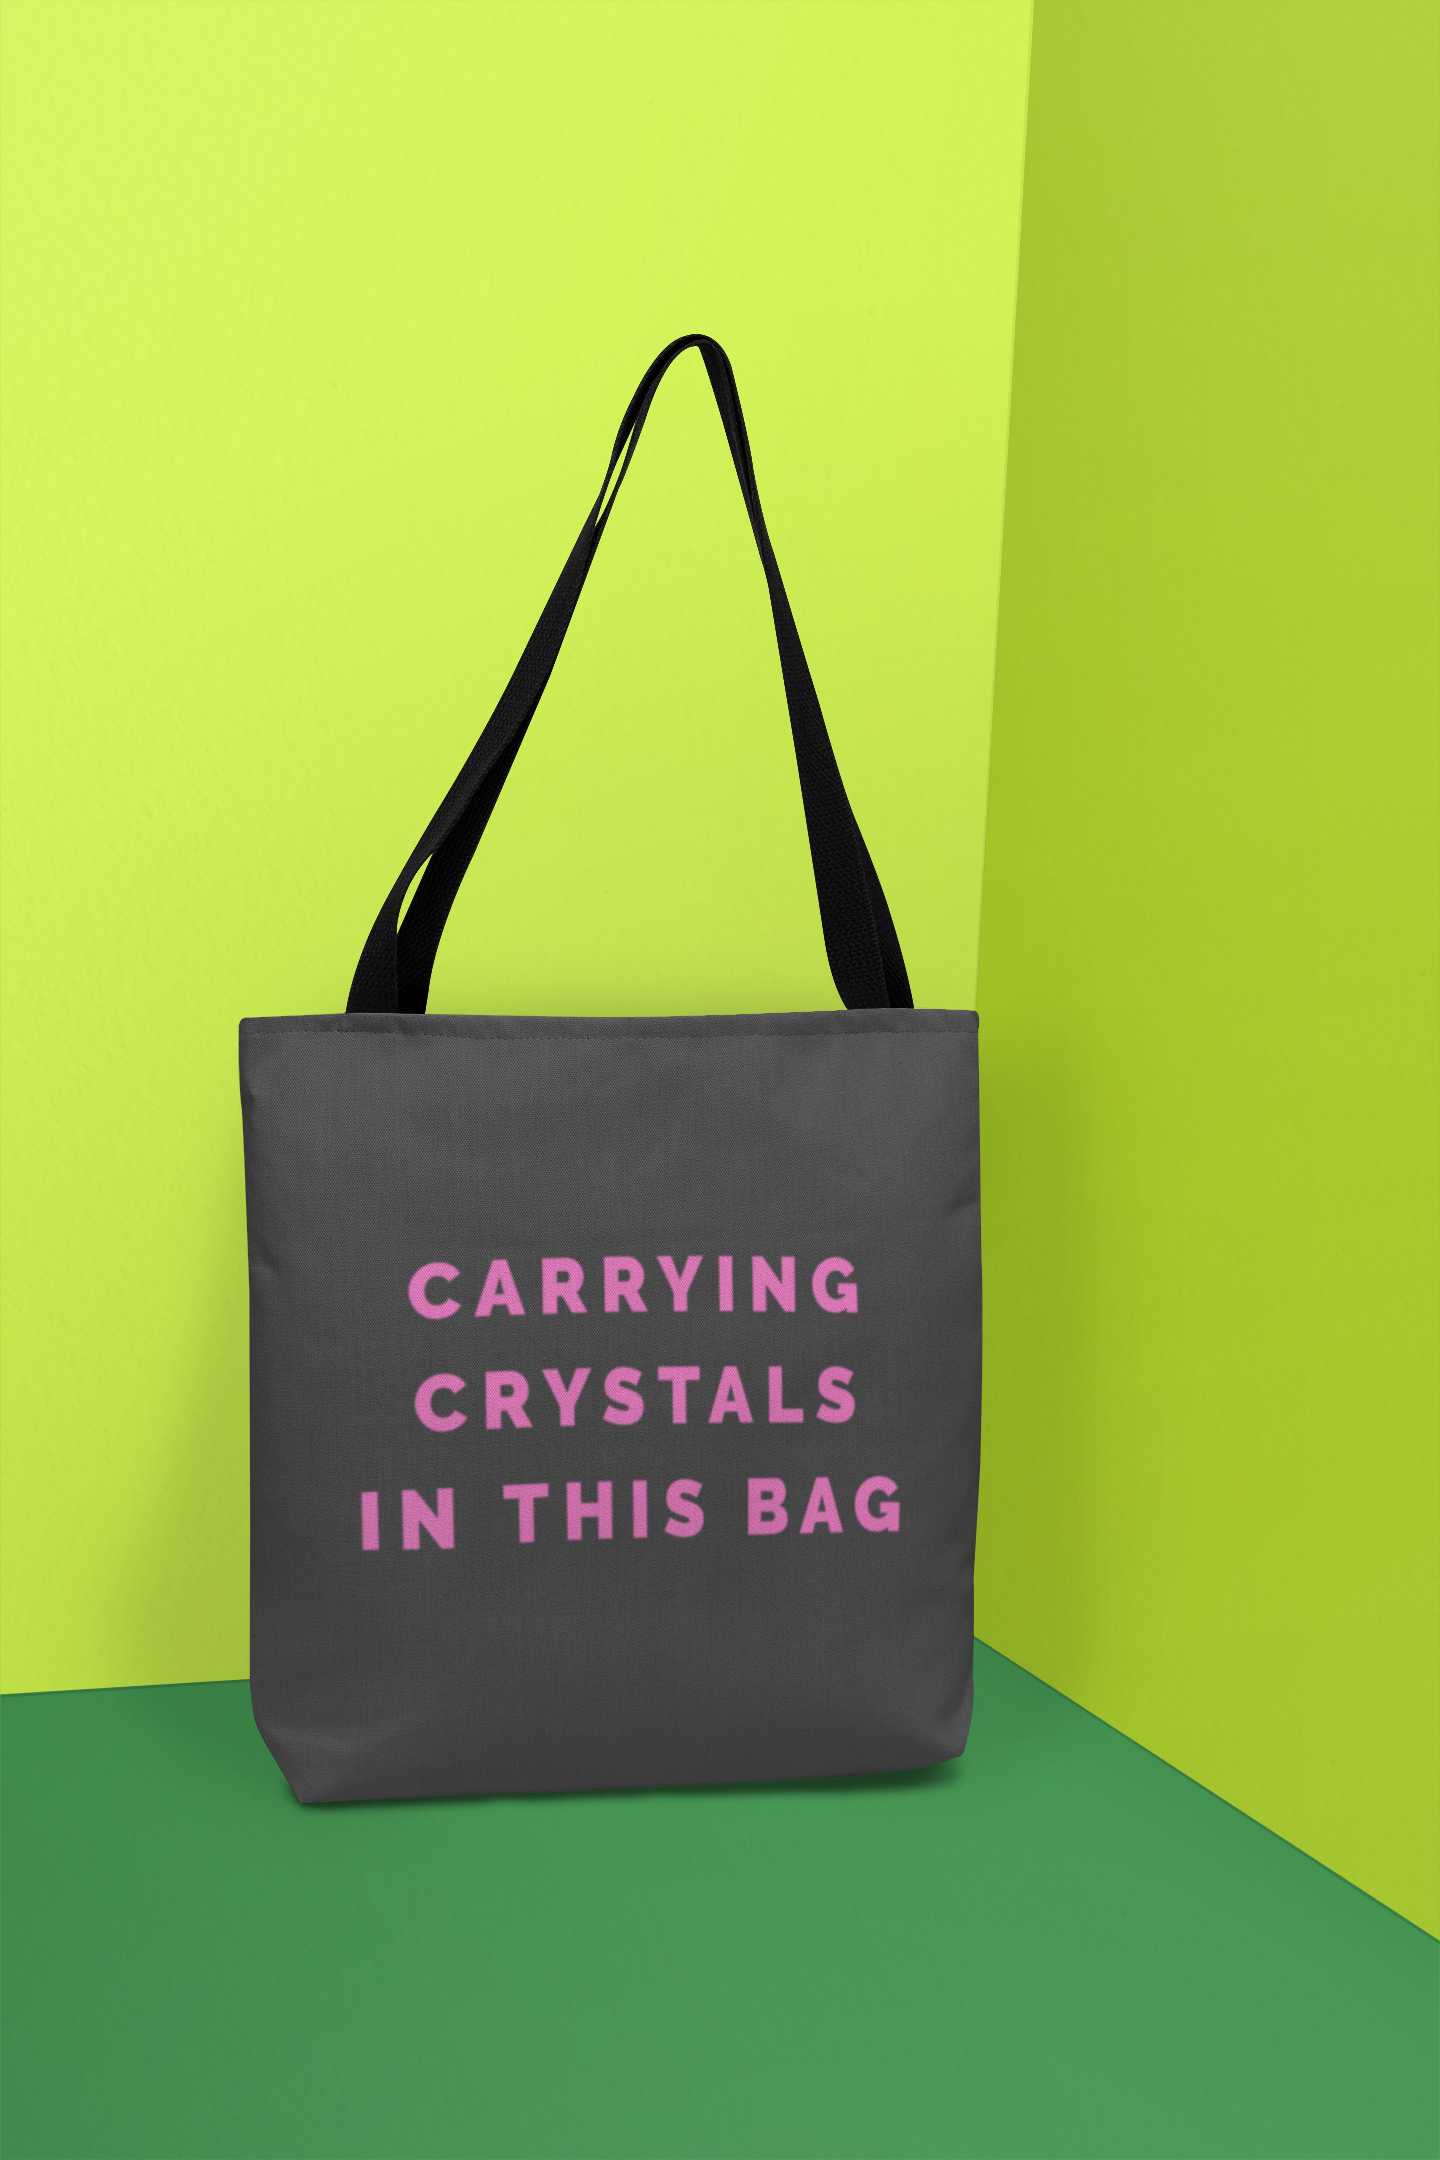 The Carrying Crystals Tote Bag